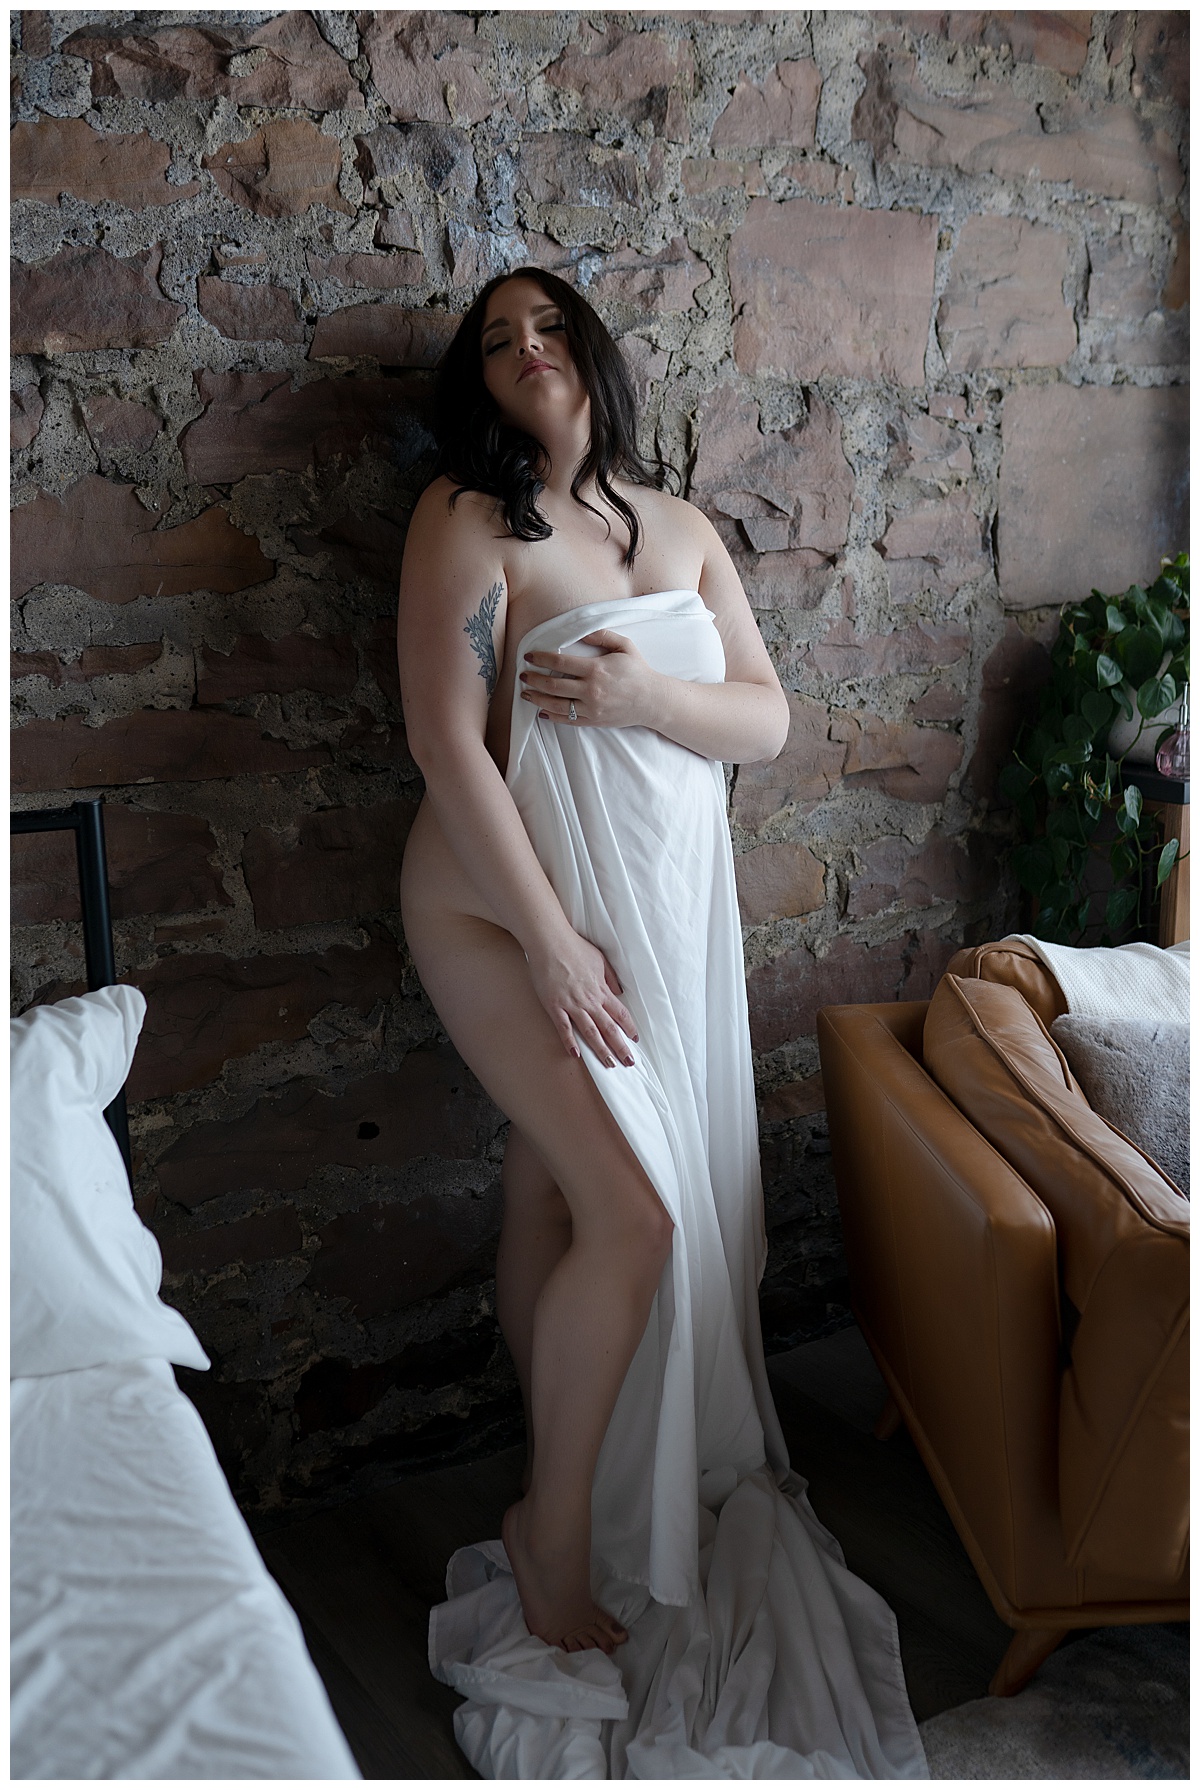 Lady covers body with sheet against wall for Emma Christine Photography